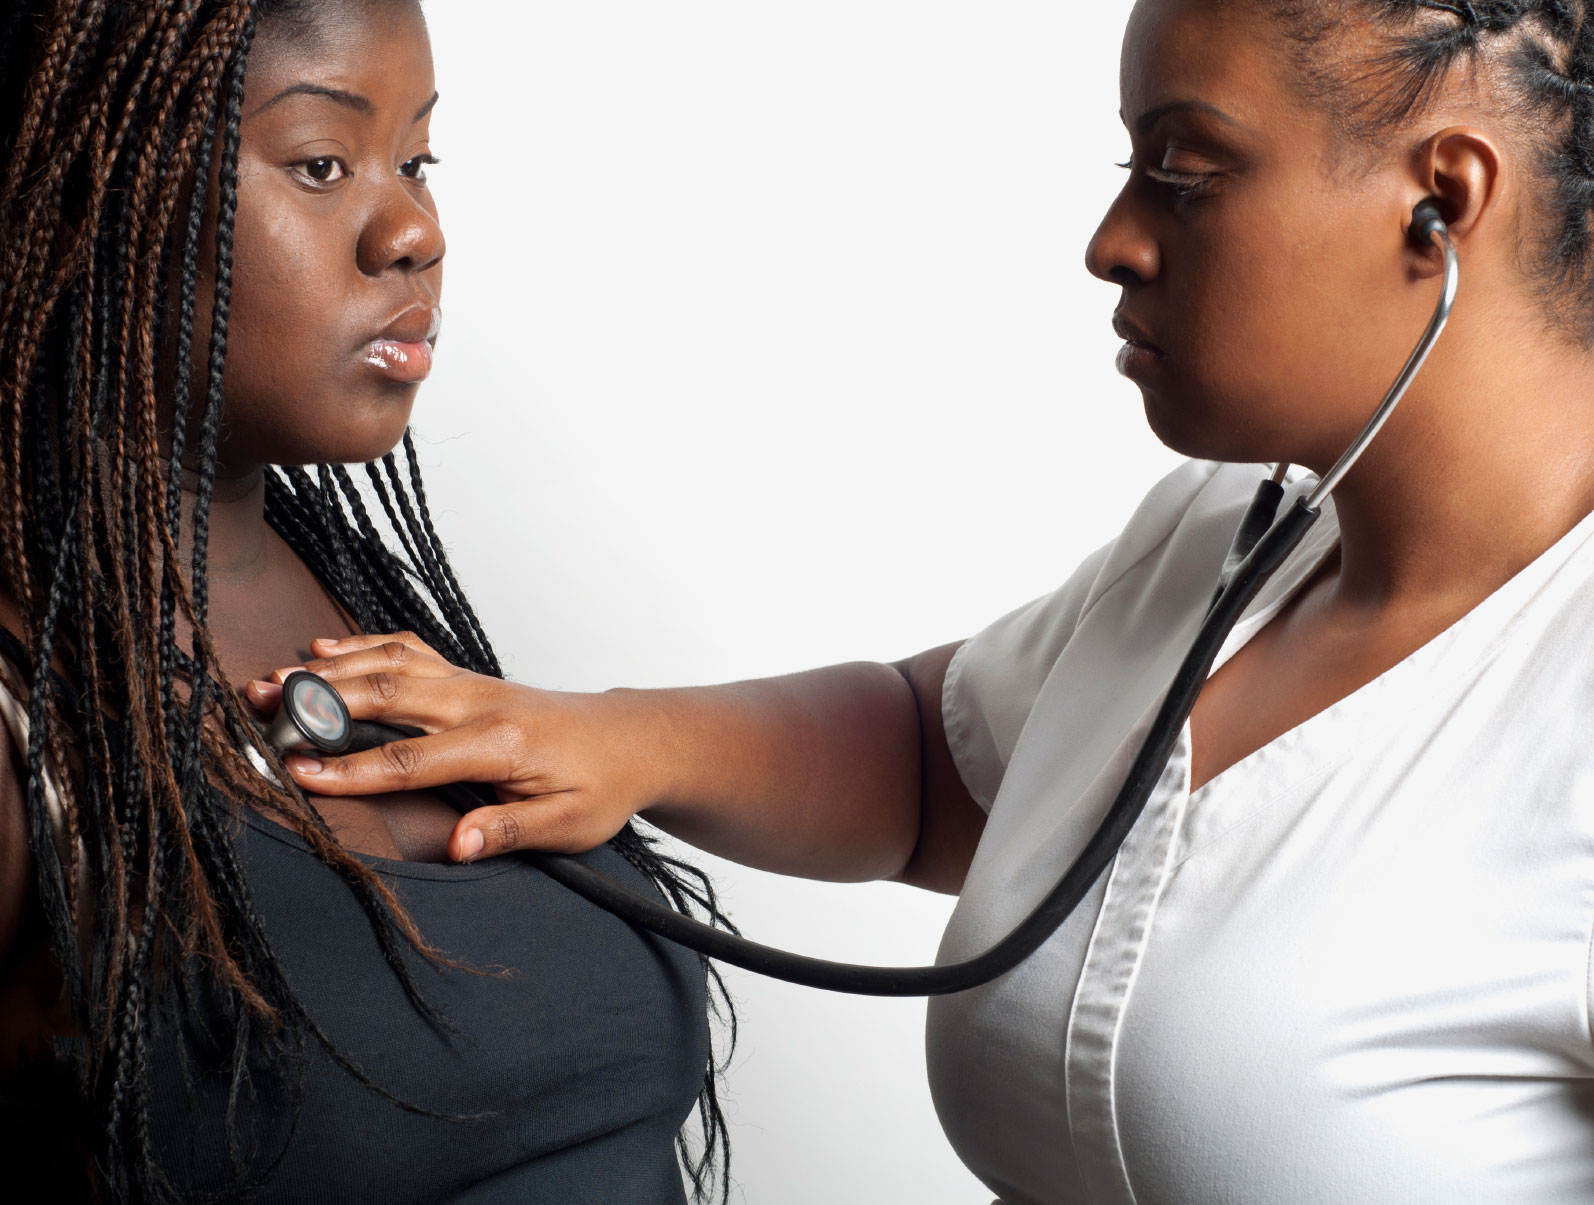 Doctor using a stethoscope to examine an overweight African-American woman.